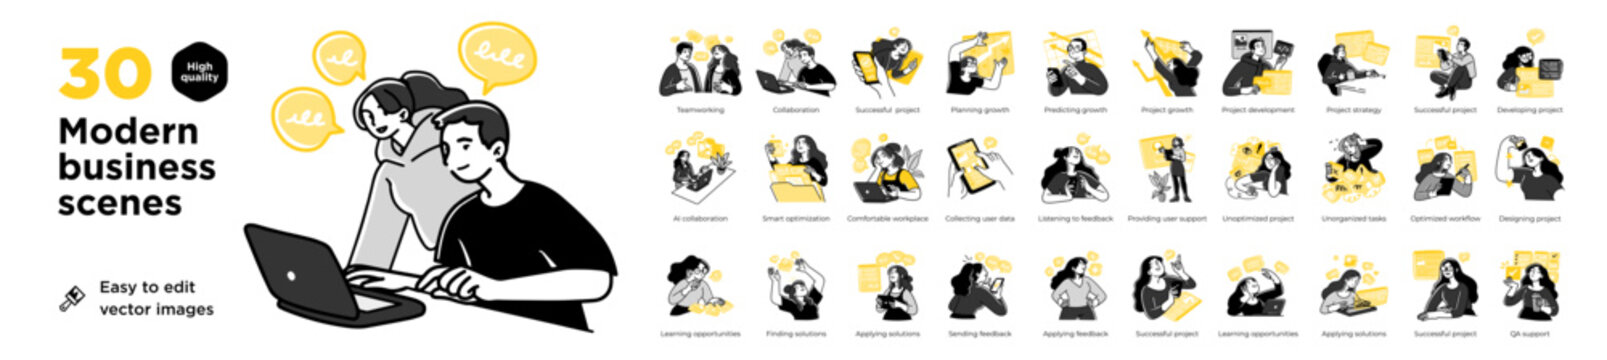 Naklejki Business Concept illustrations. Mega set. Collection of scenes with men and women taking part in business activities. Vector illustration